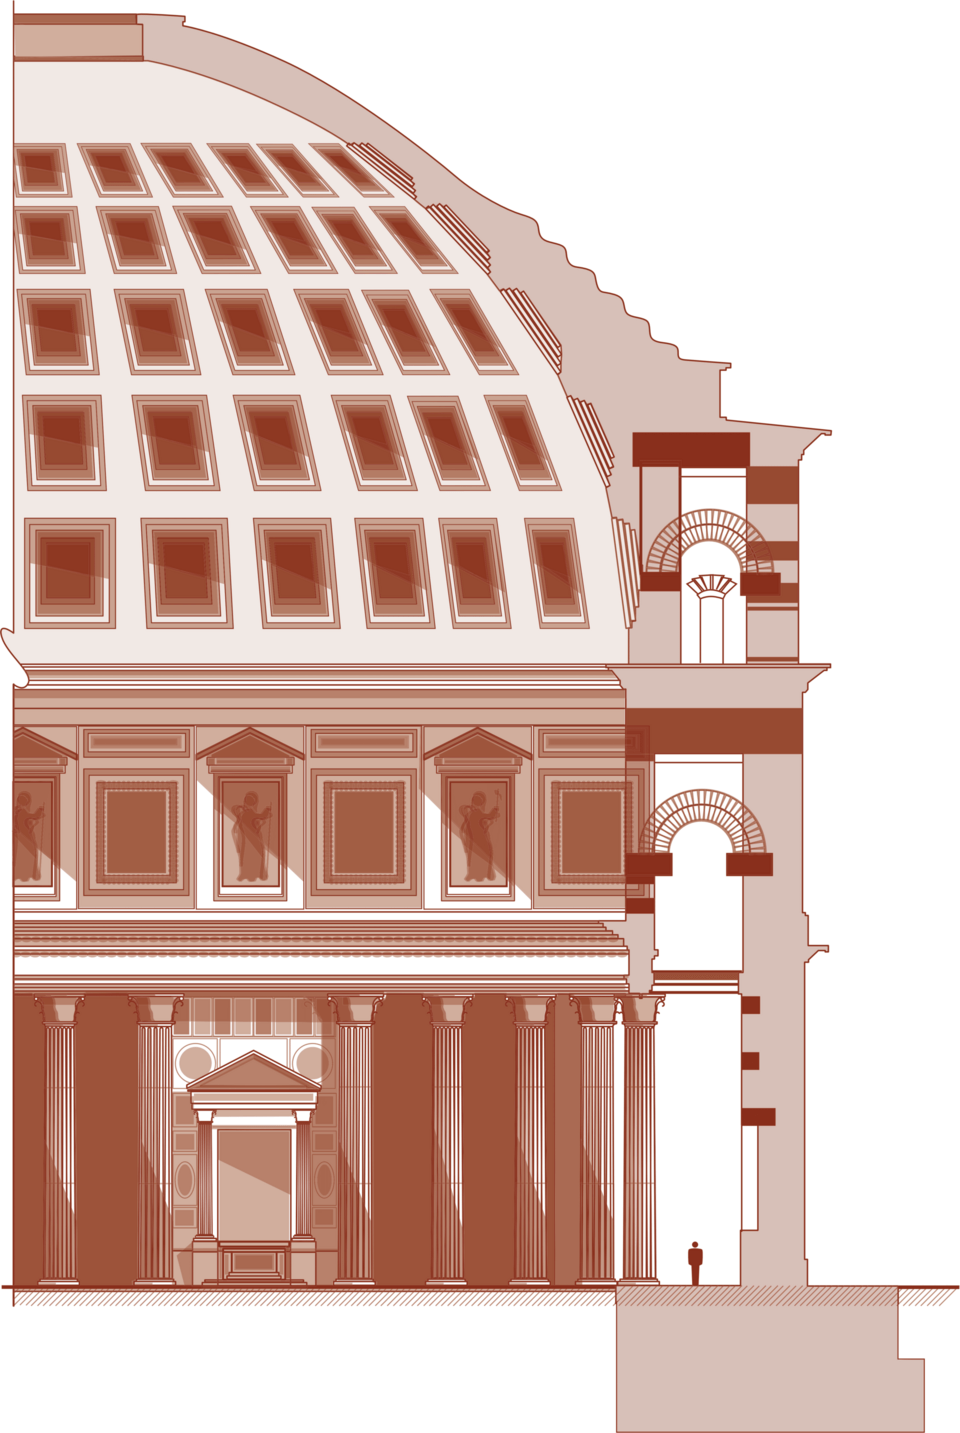 Cross-section illustration helps convey the scale of the Pantheon.